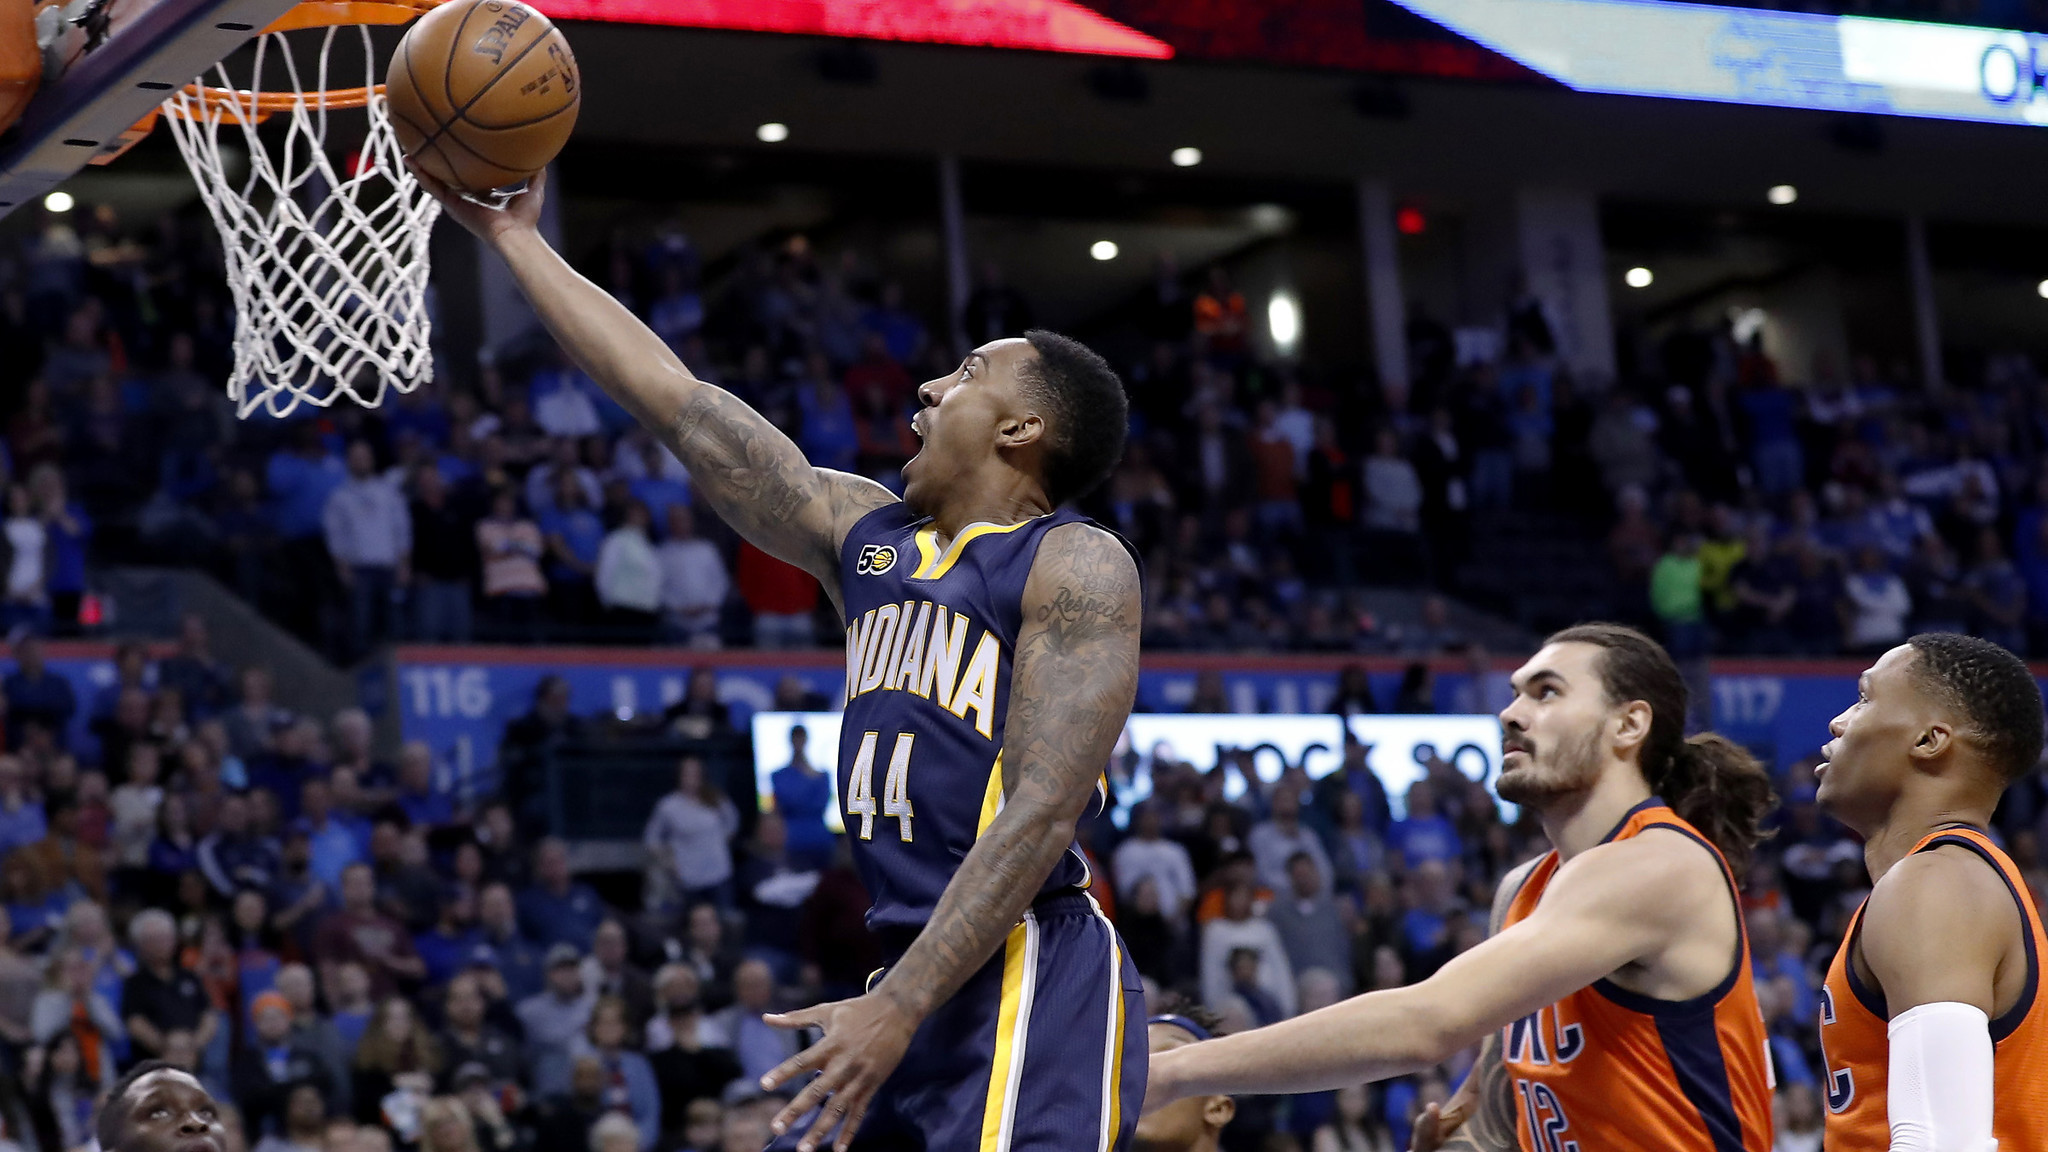 Teague, Pacers outlast Westbrook, Thunder 115-111 in OT